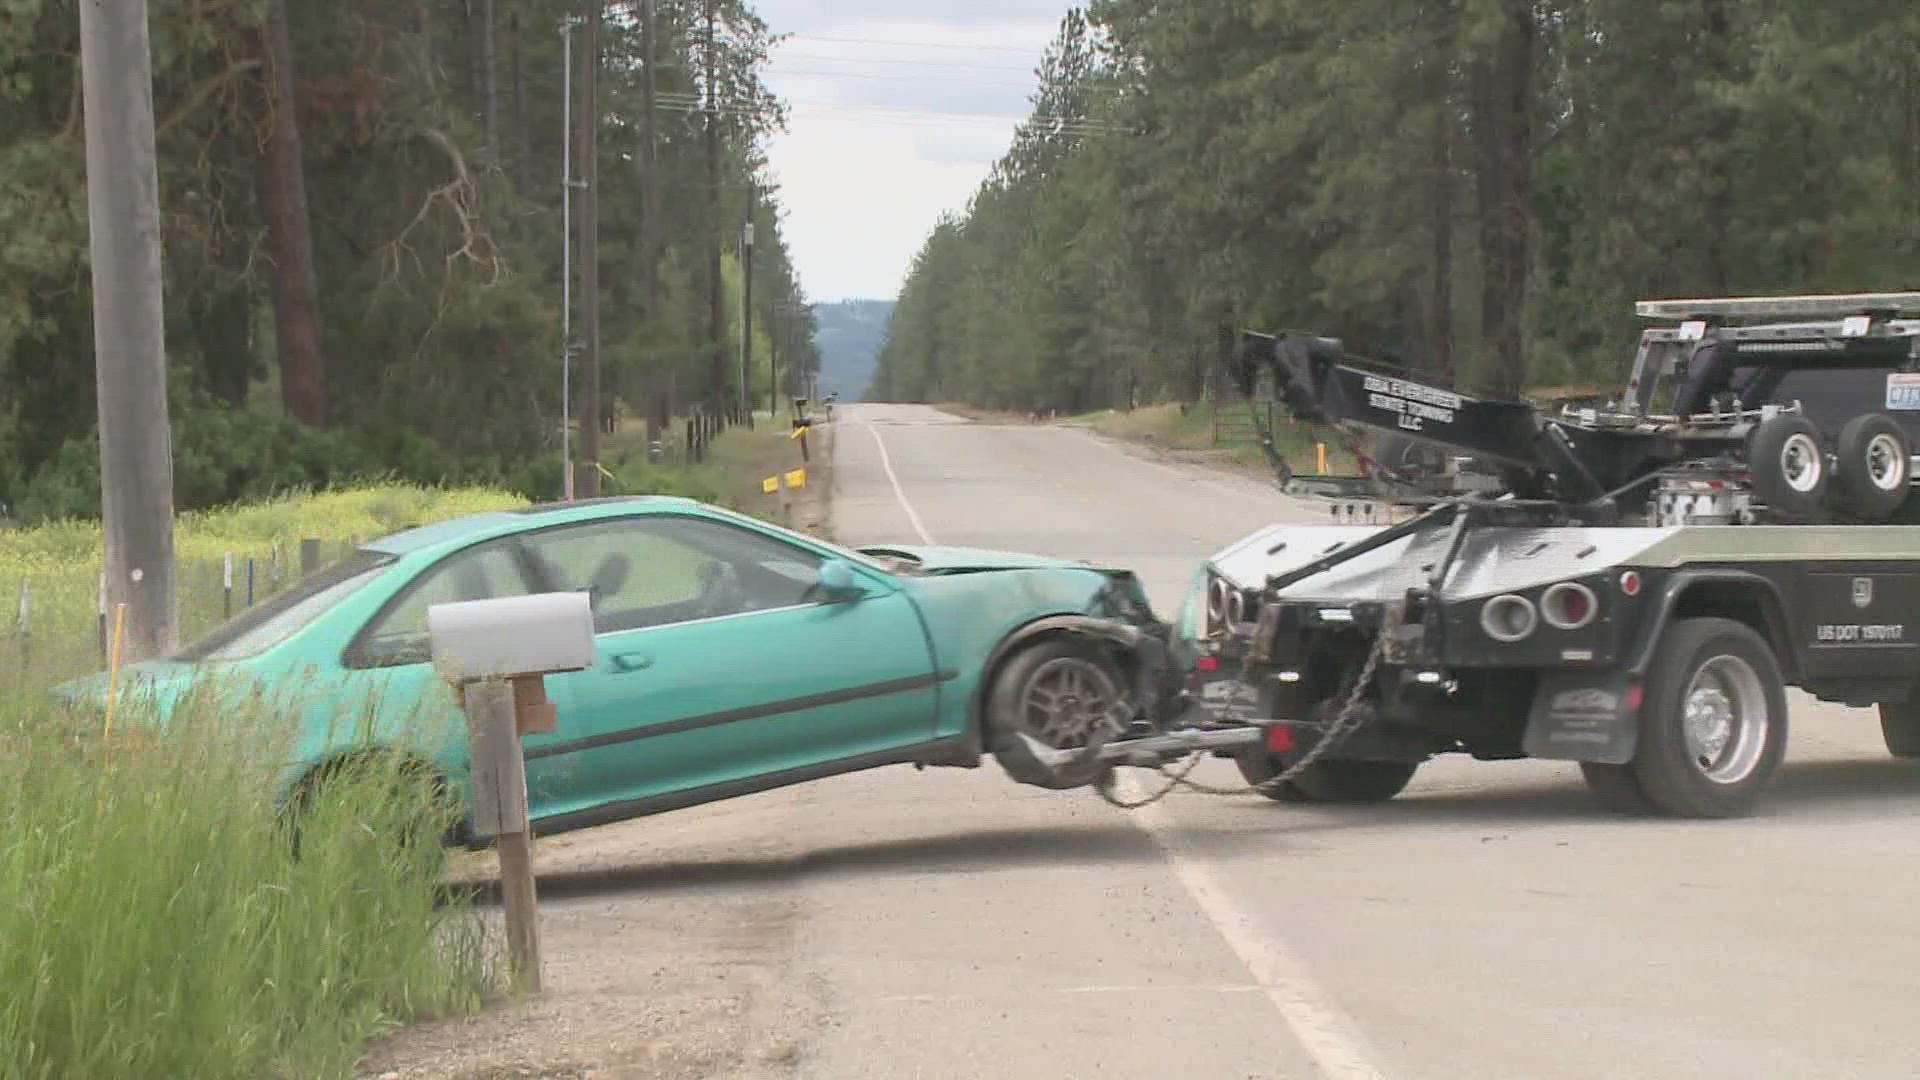 Spokane County officials working to remove over 700 cars from a